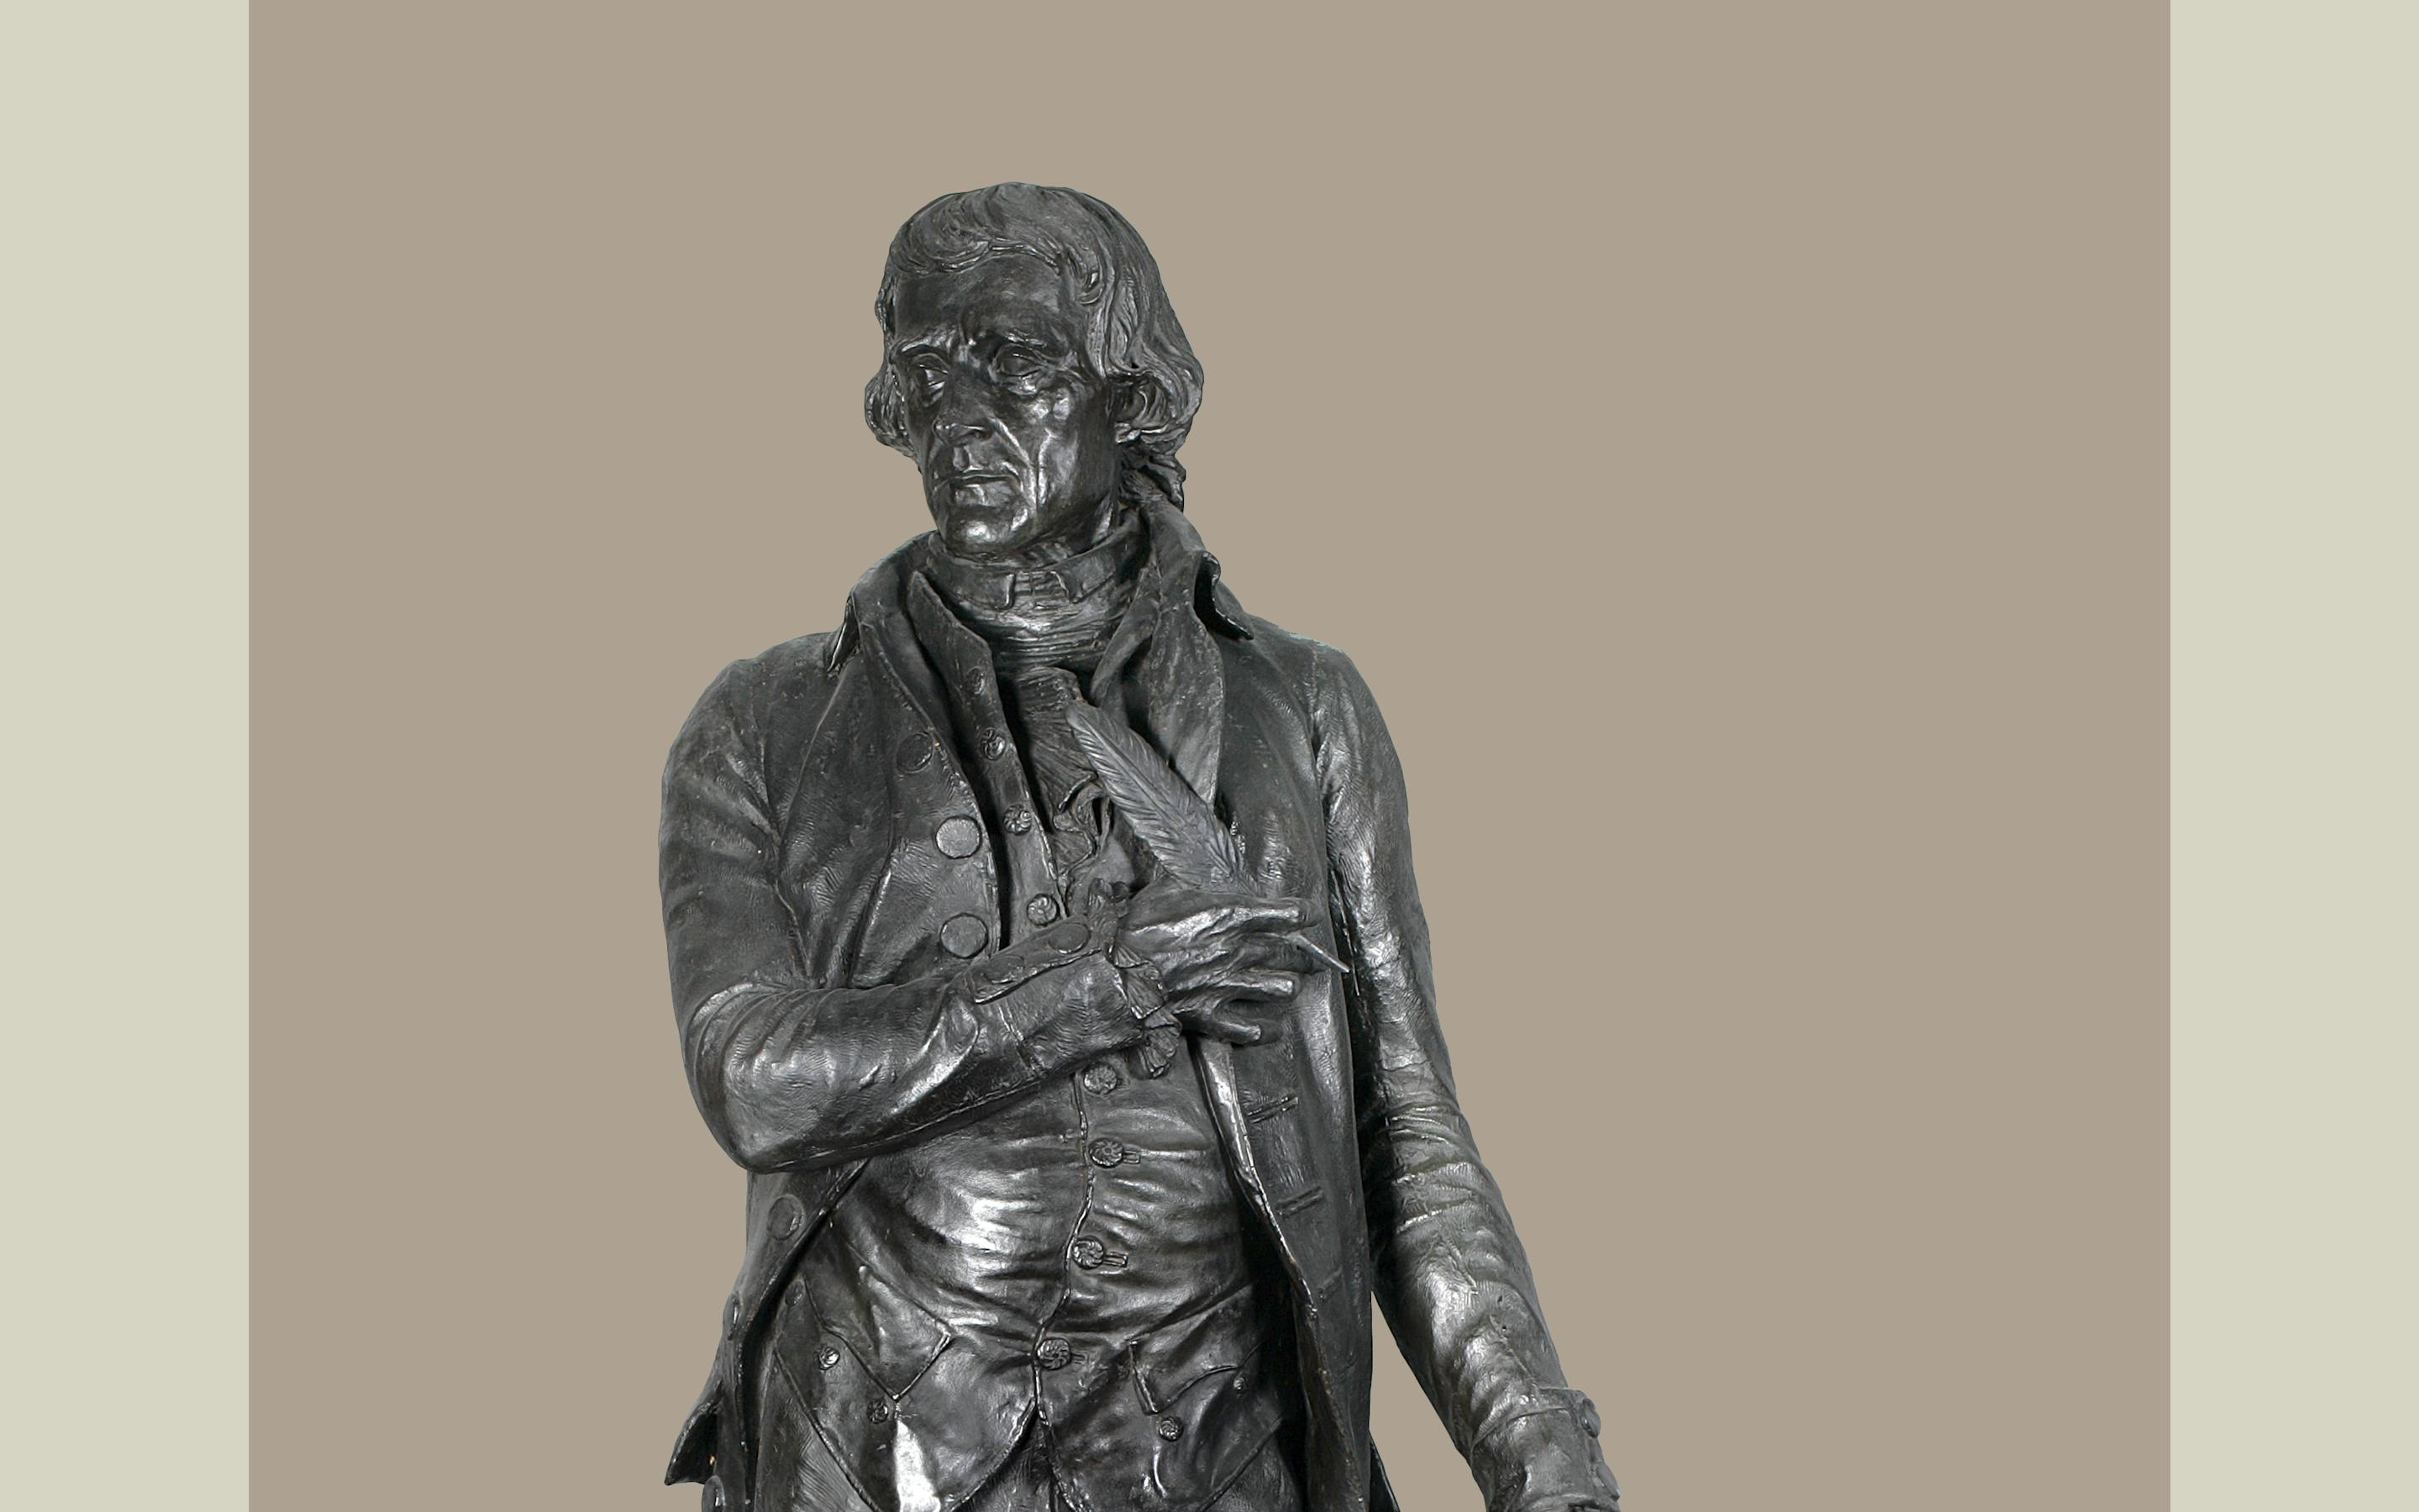 Pierre Jean David d'Angers (French, 1788-1856)
Thomas Jefferson (1743-1826), 1833
Painted plaster 
85 x 37 x 35 1/2 in. 
Collection of the Public Design Commission of the City of New York